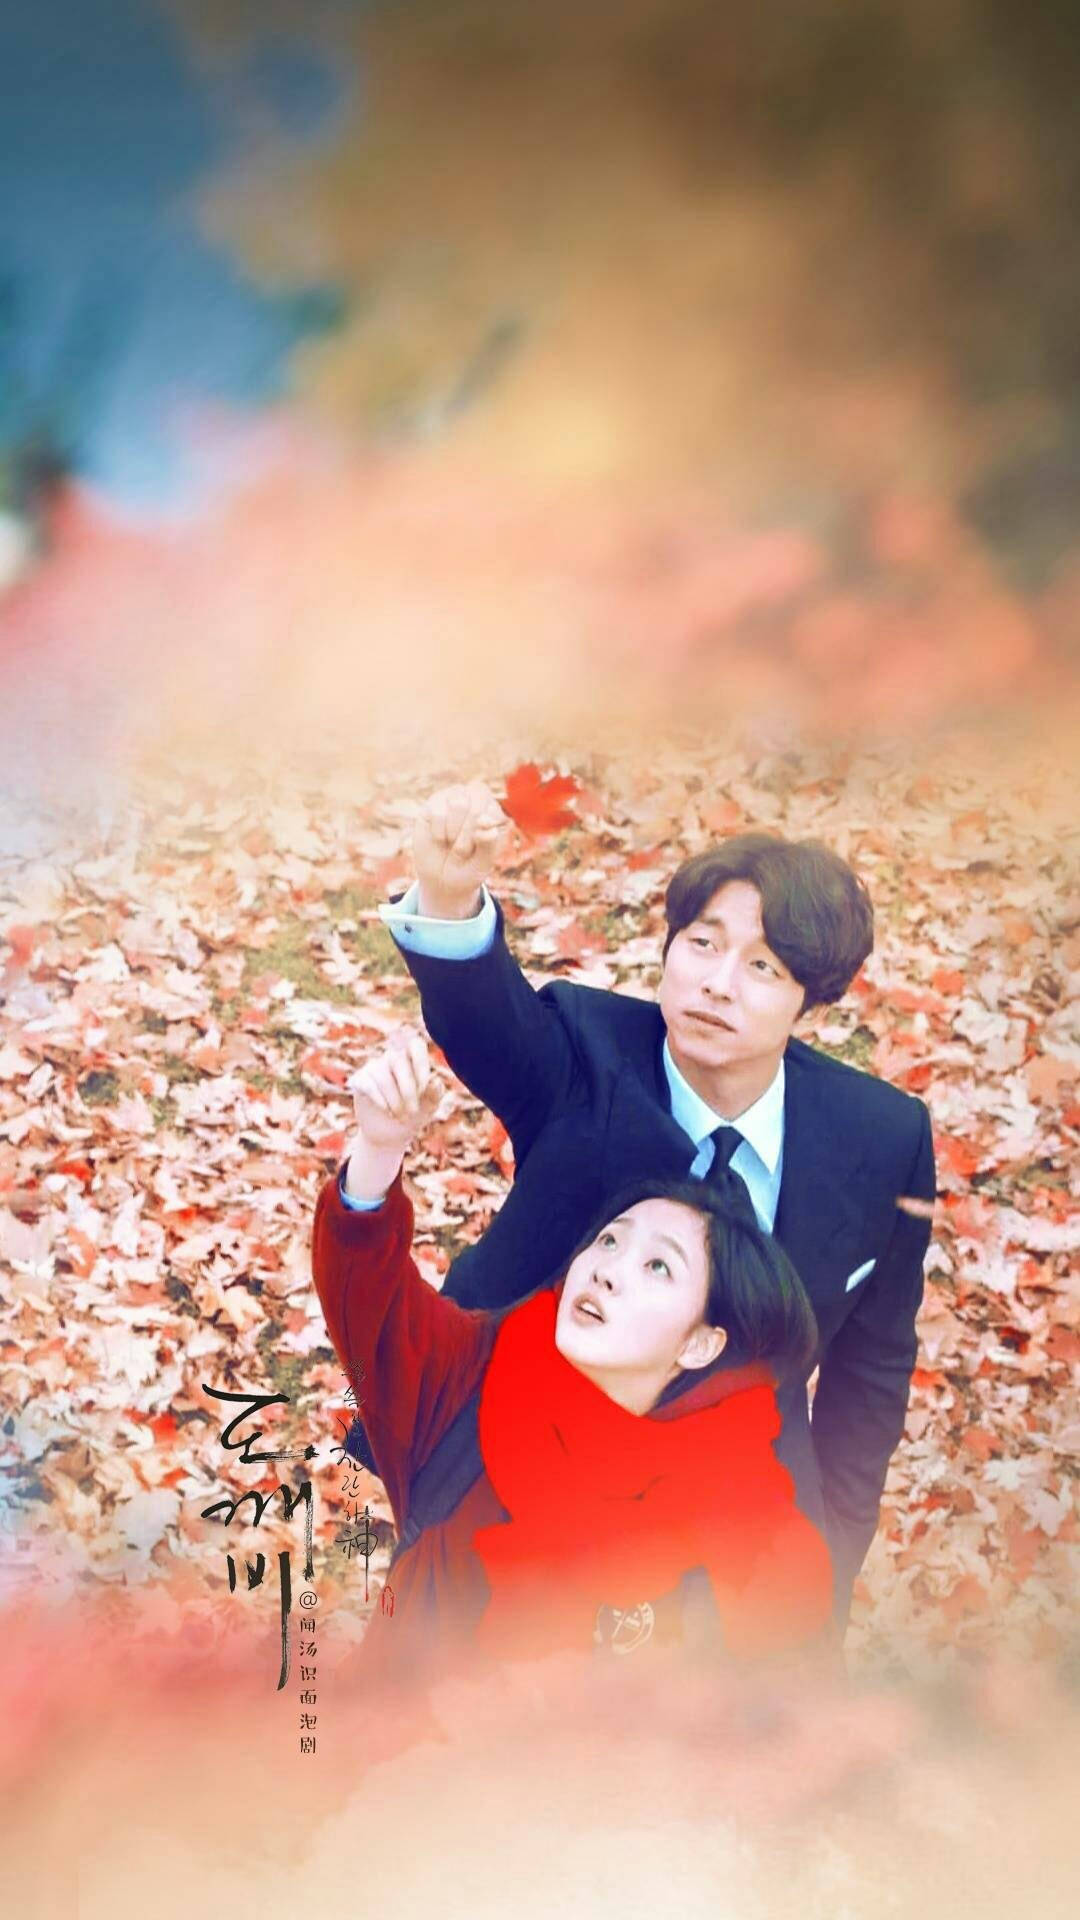 Kdrama Wallpapers